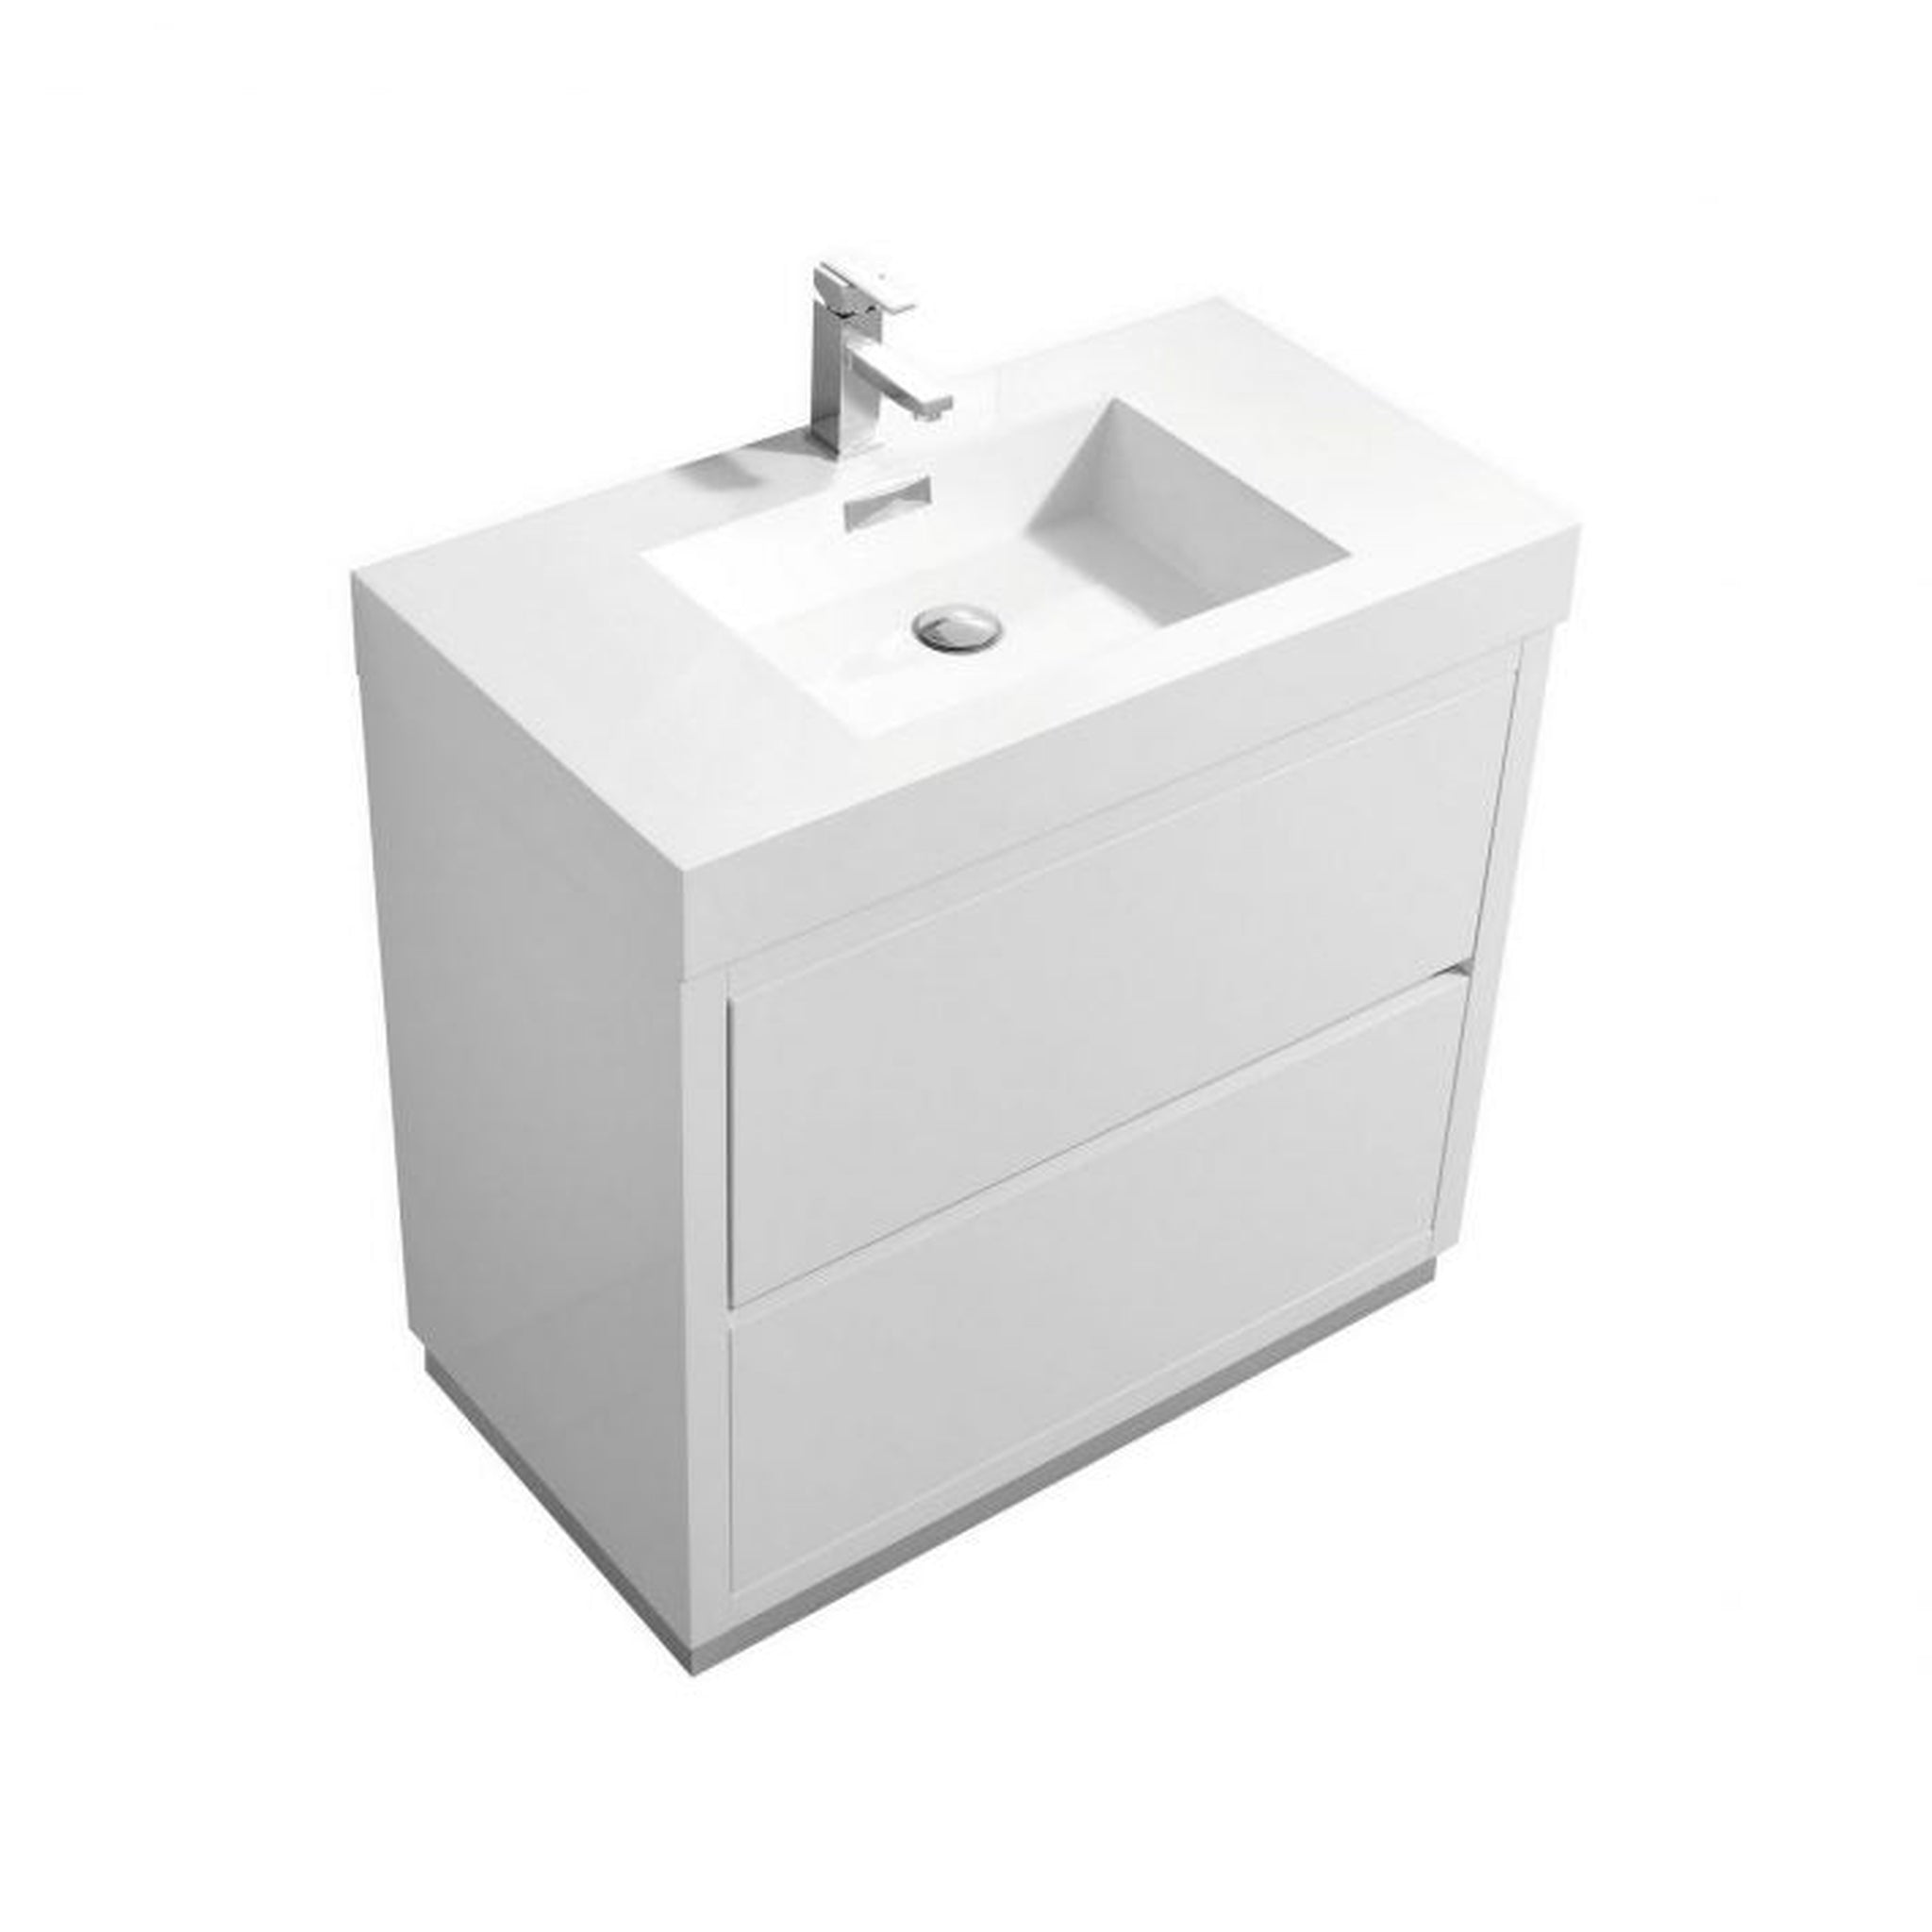 KubeBath, KubeBath Bliss 36" High Gloss White Freestanding Modern Bathroom Vanity With Single Integrated Acrylic Sink With Overflow and 36" White Framed Mirror With Shelf